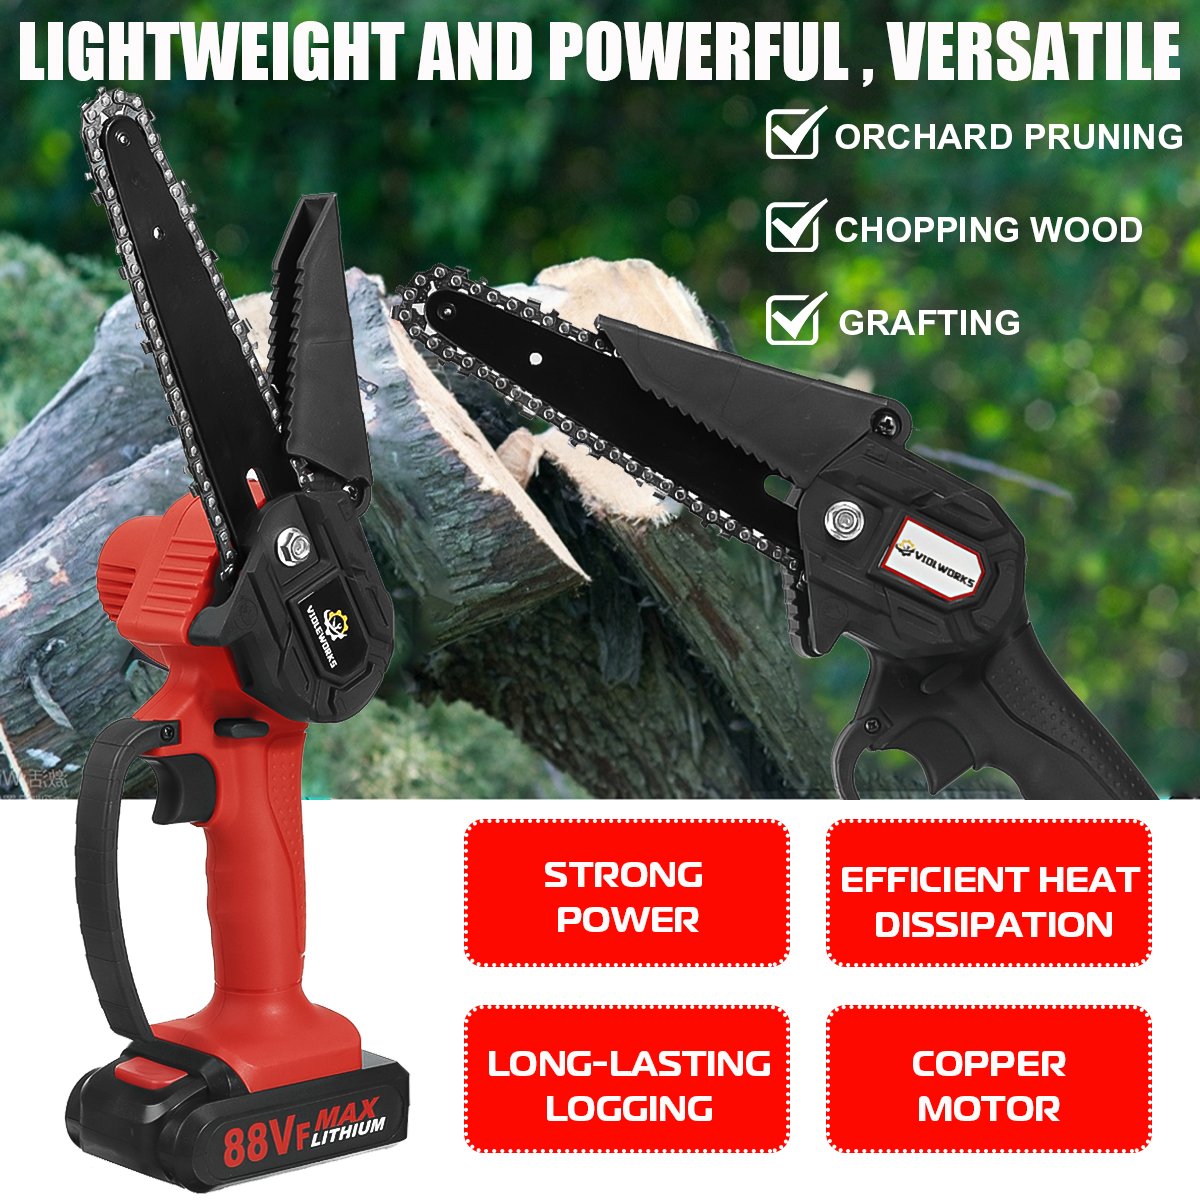 VIOLEWORKS-6-Inch-88VF-Cordless-Electric-Chain-Saw-One-Hand-Saw-LED-Woodworking-Wood-Cutter-W-12-Bat-1868927-5